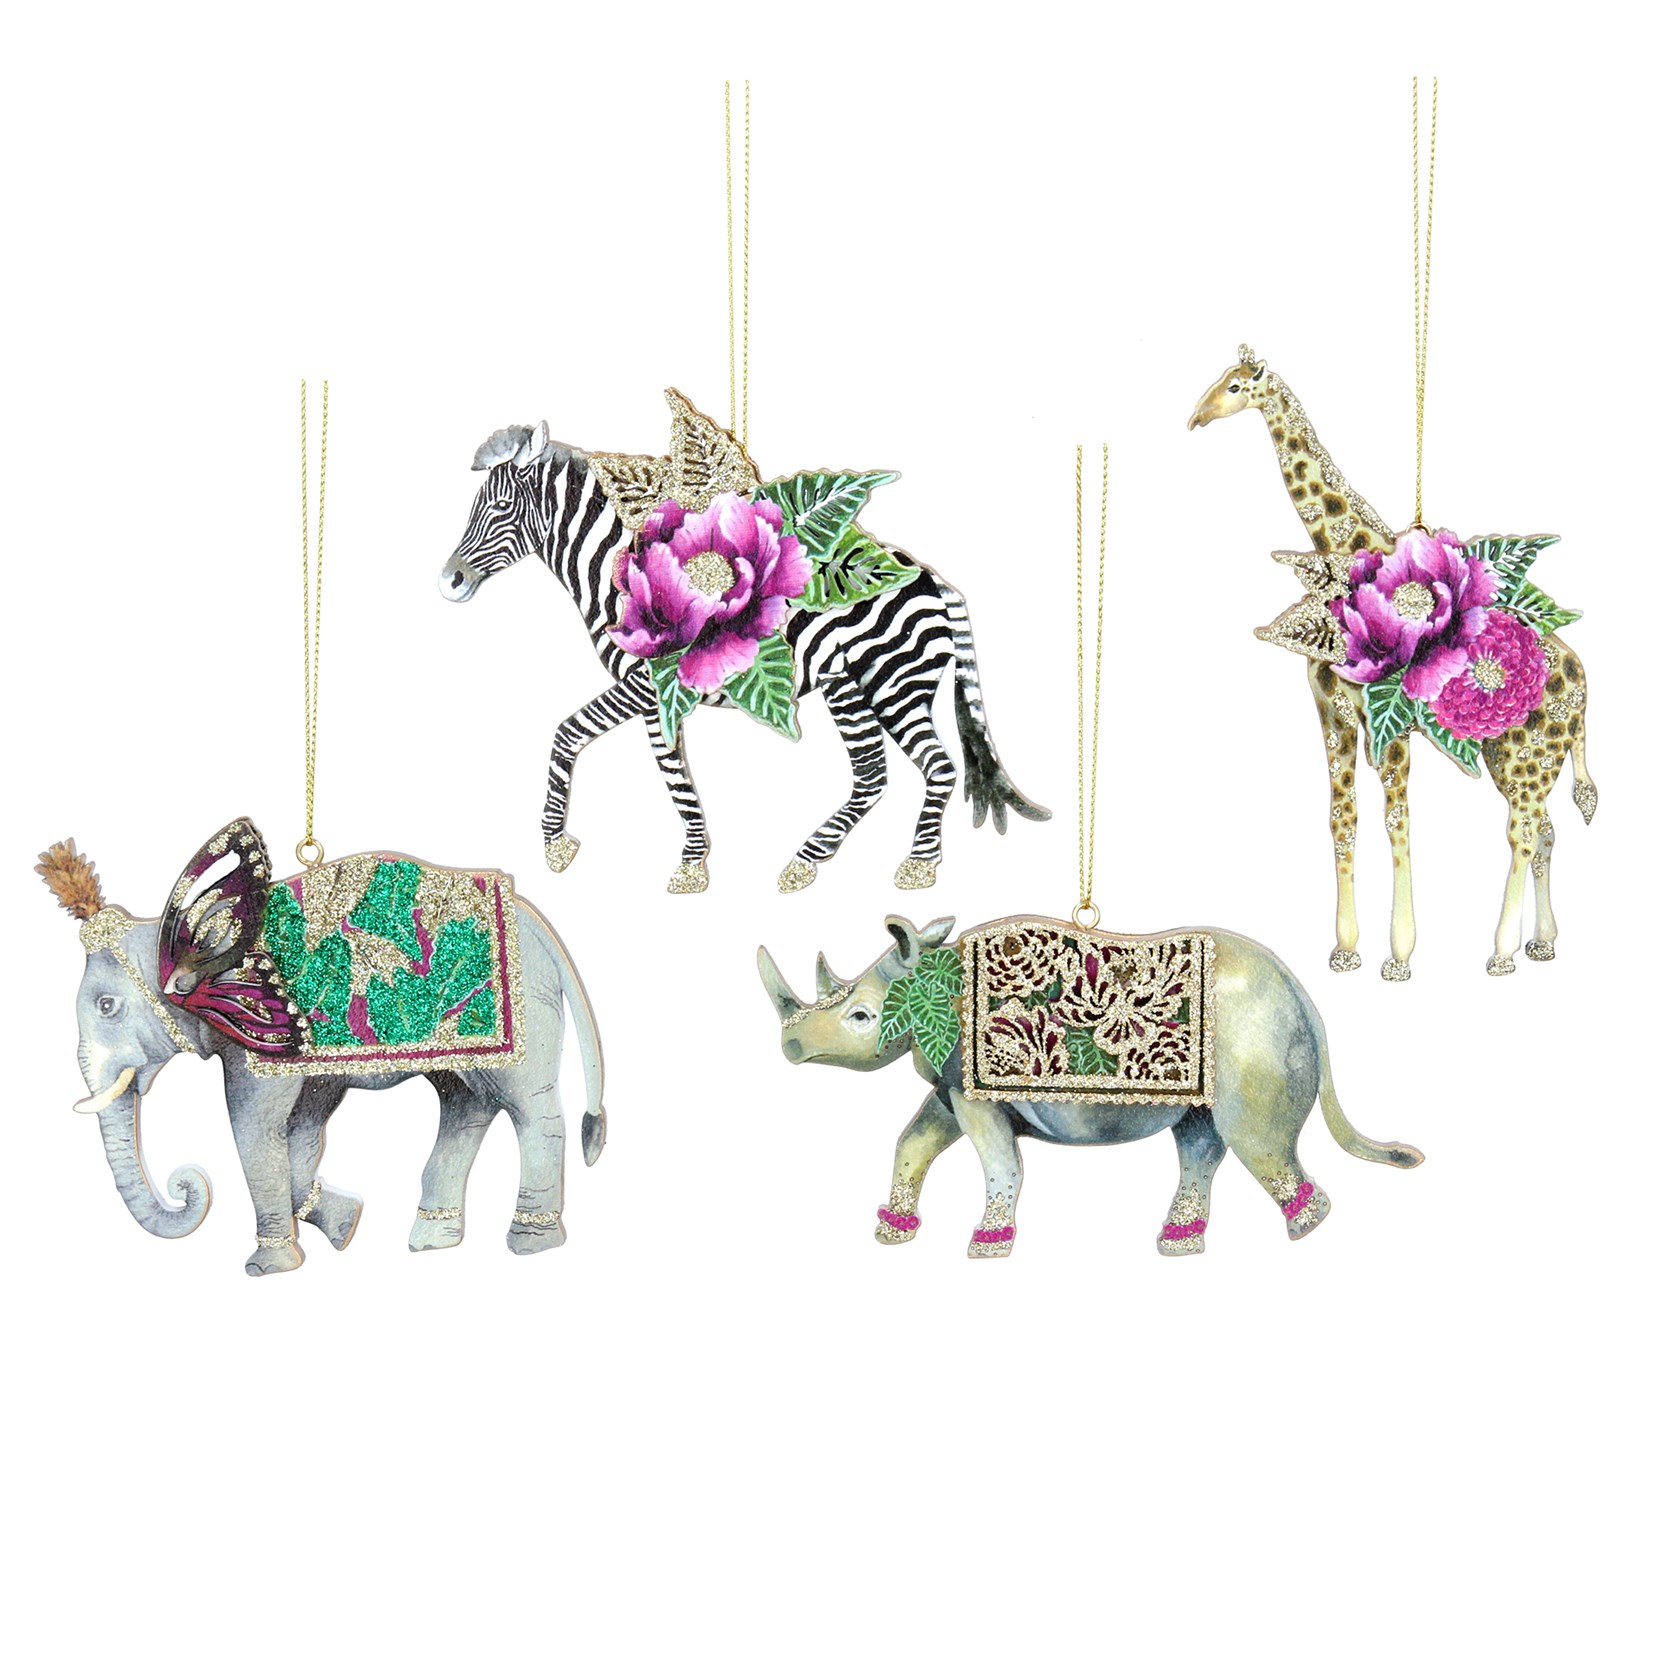 Tropic fantasy animals hanging Christmas decoration. By Gisela Graham. The perfect festive addition to your home.